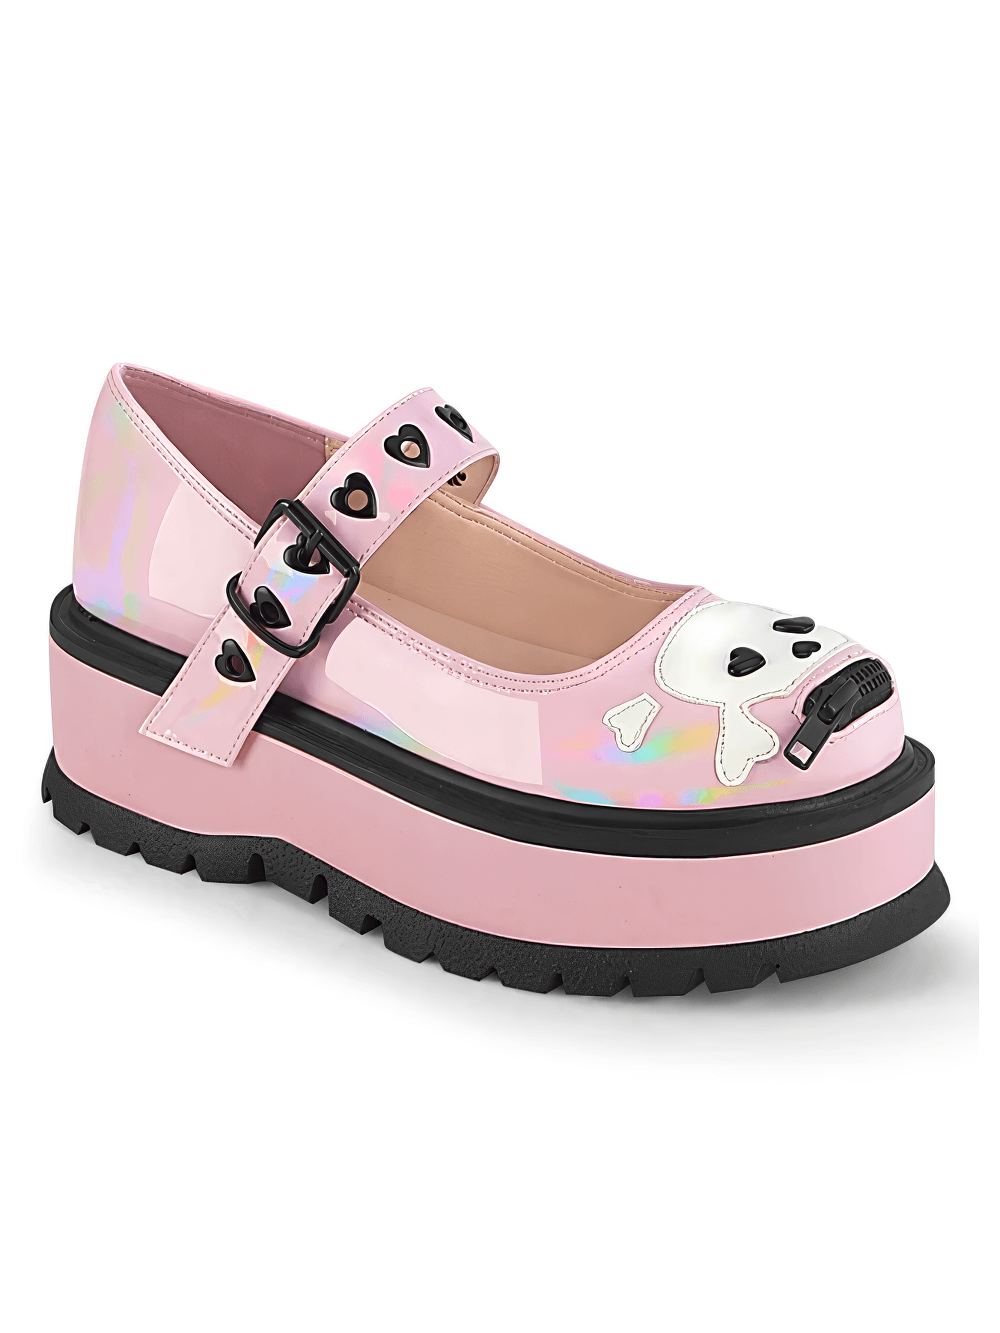 DEMONIA Pink Hologram Mary Jane Shoes with Skull Accent